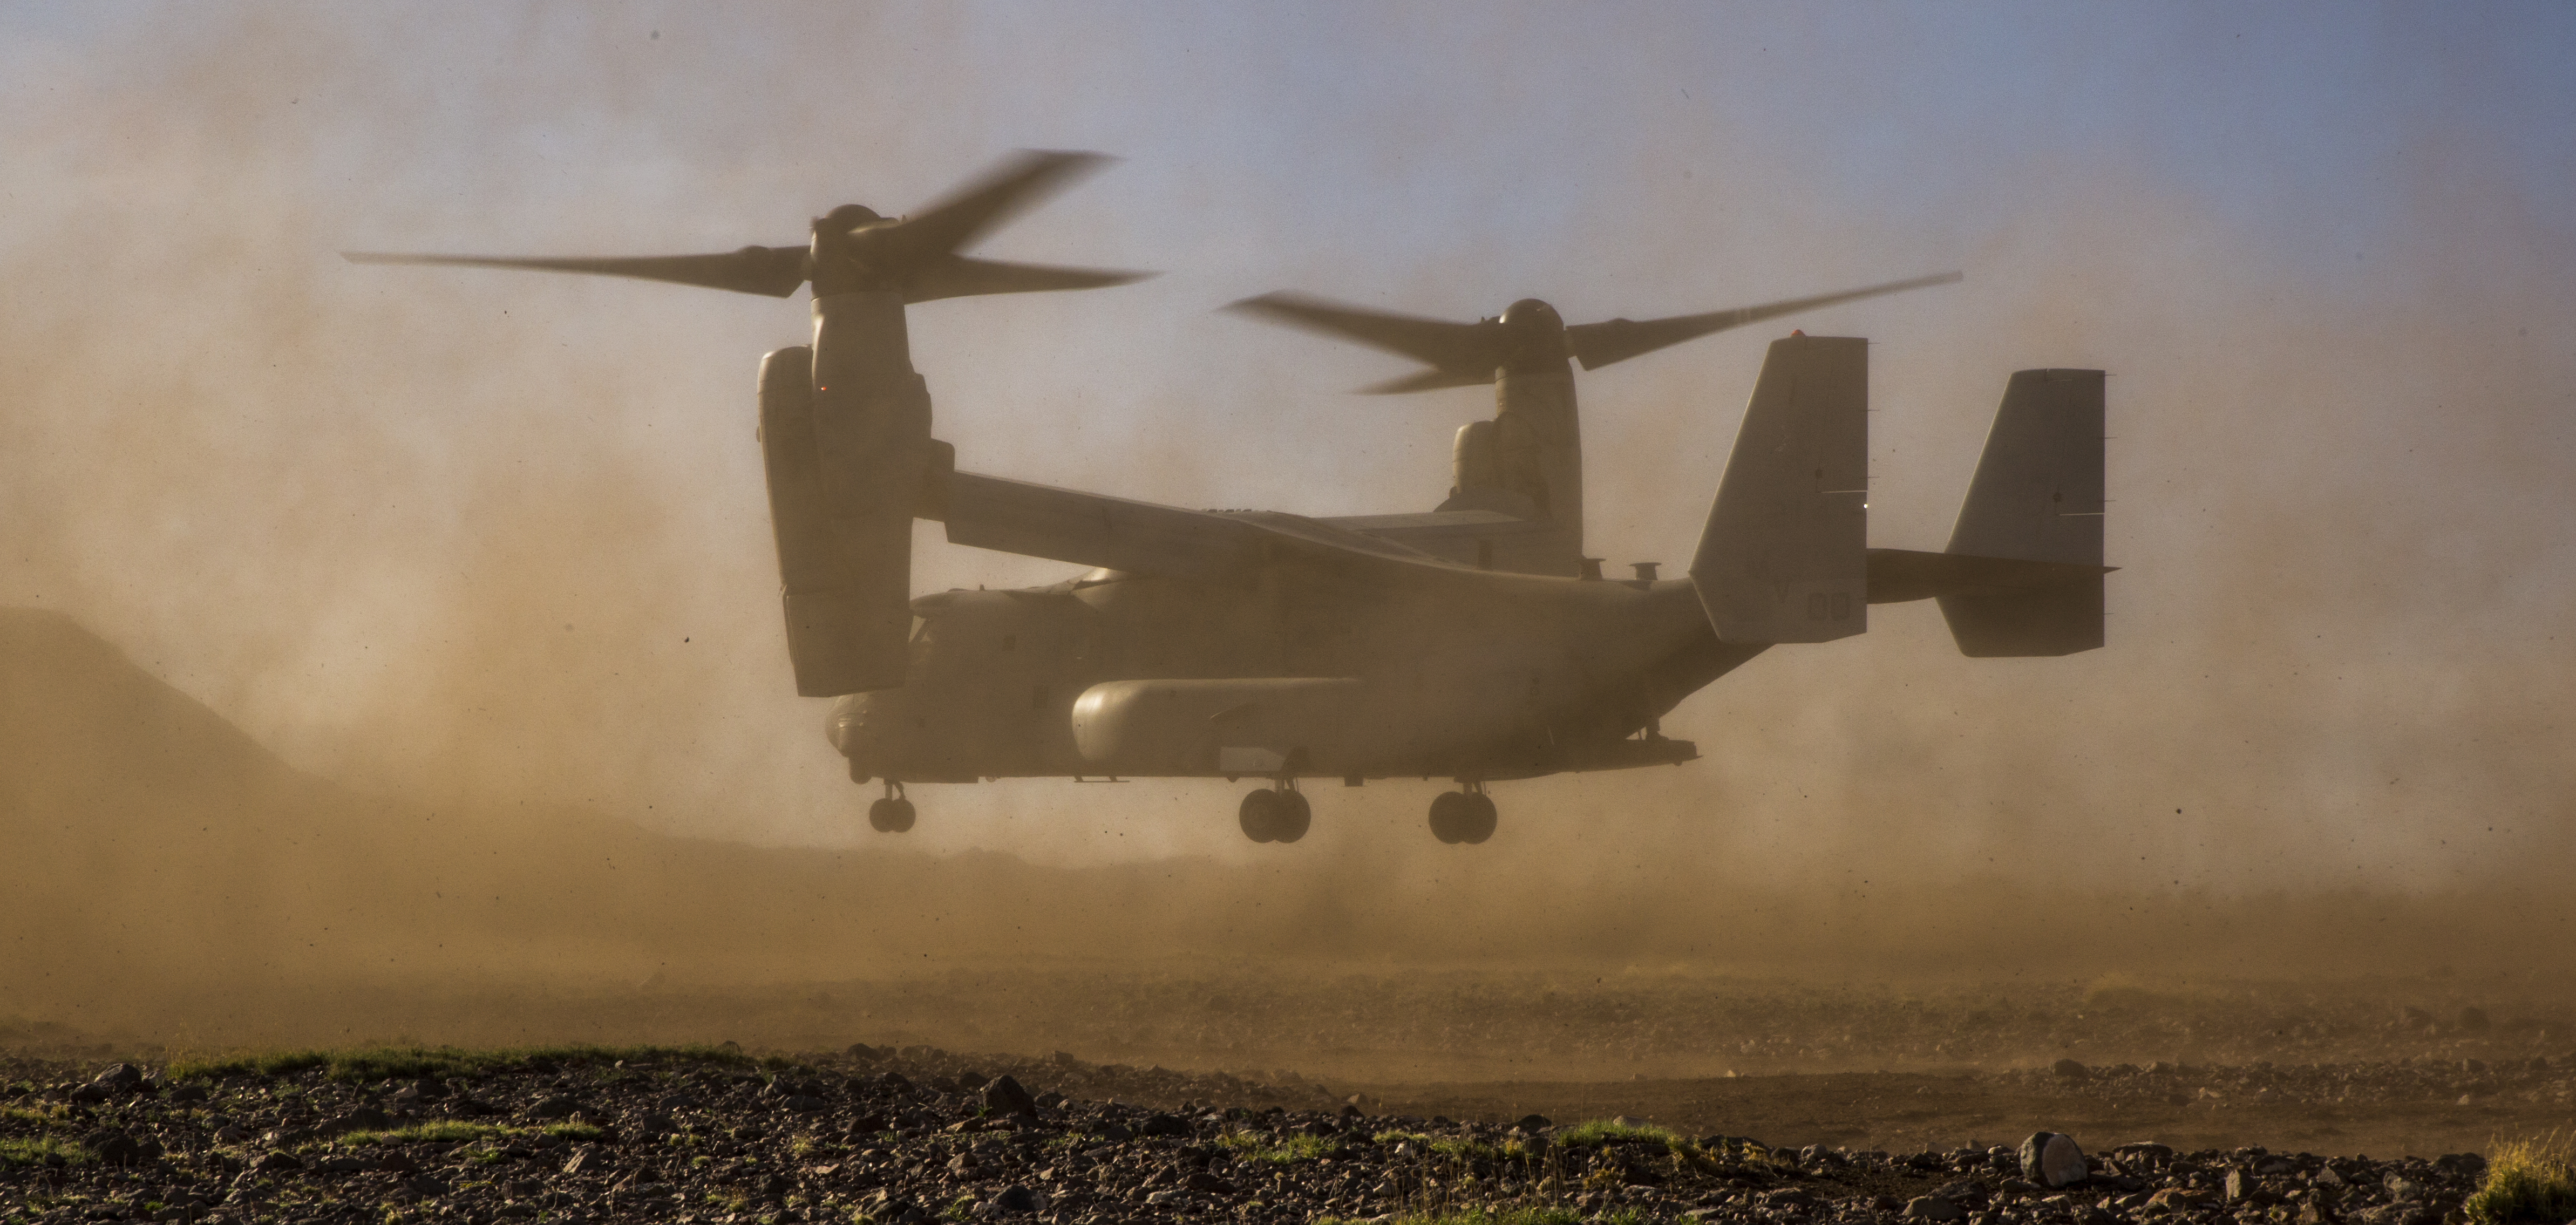 An MV-22B Osprey with Marine Operational Test and Evaluation Squadron (VMX) 22 prepares to land during reduced visibility landing aboard Kirtland Air Force Base, Albuquerque, N.M., April 2, 2015. US Marine Corps photo.